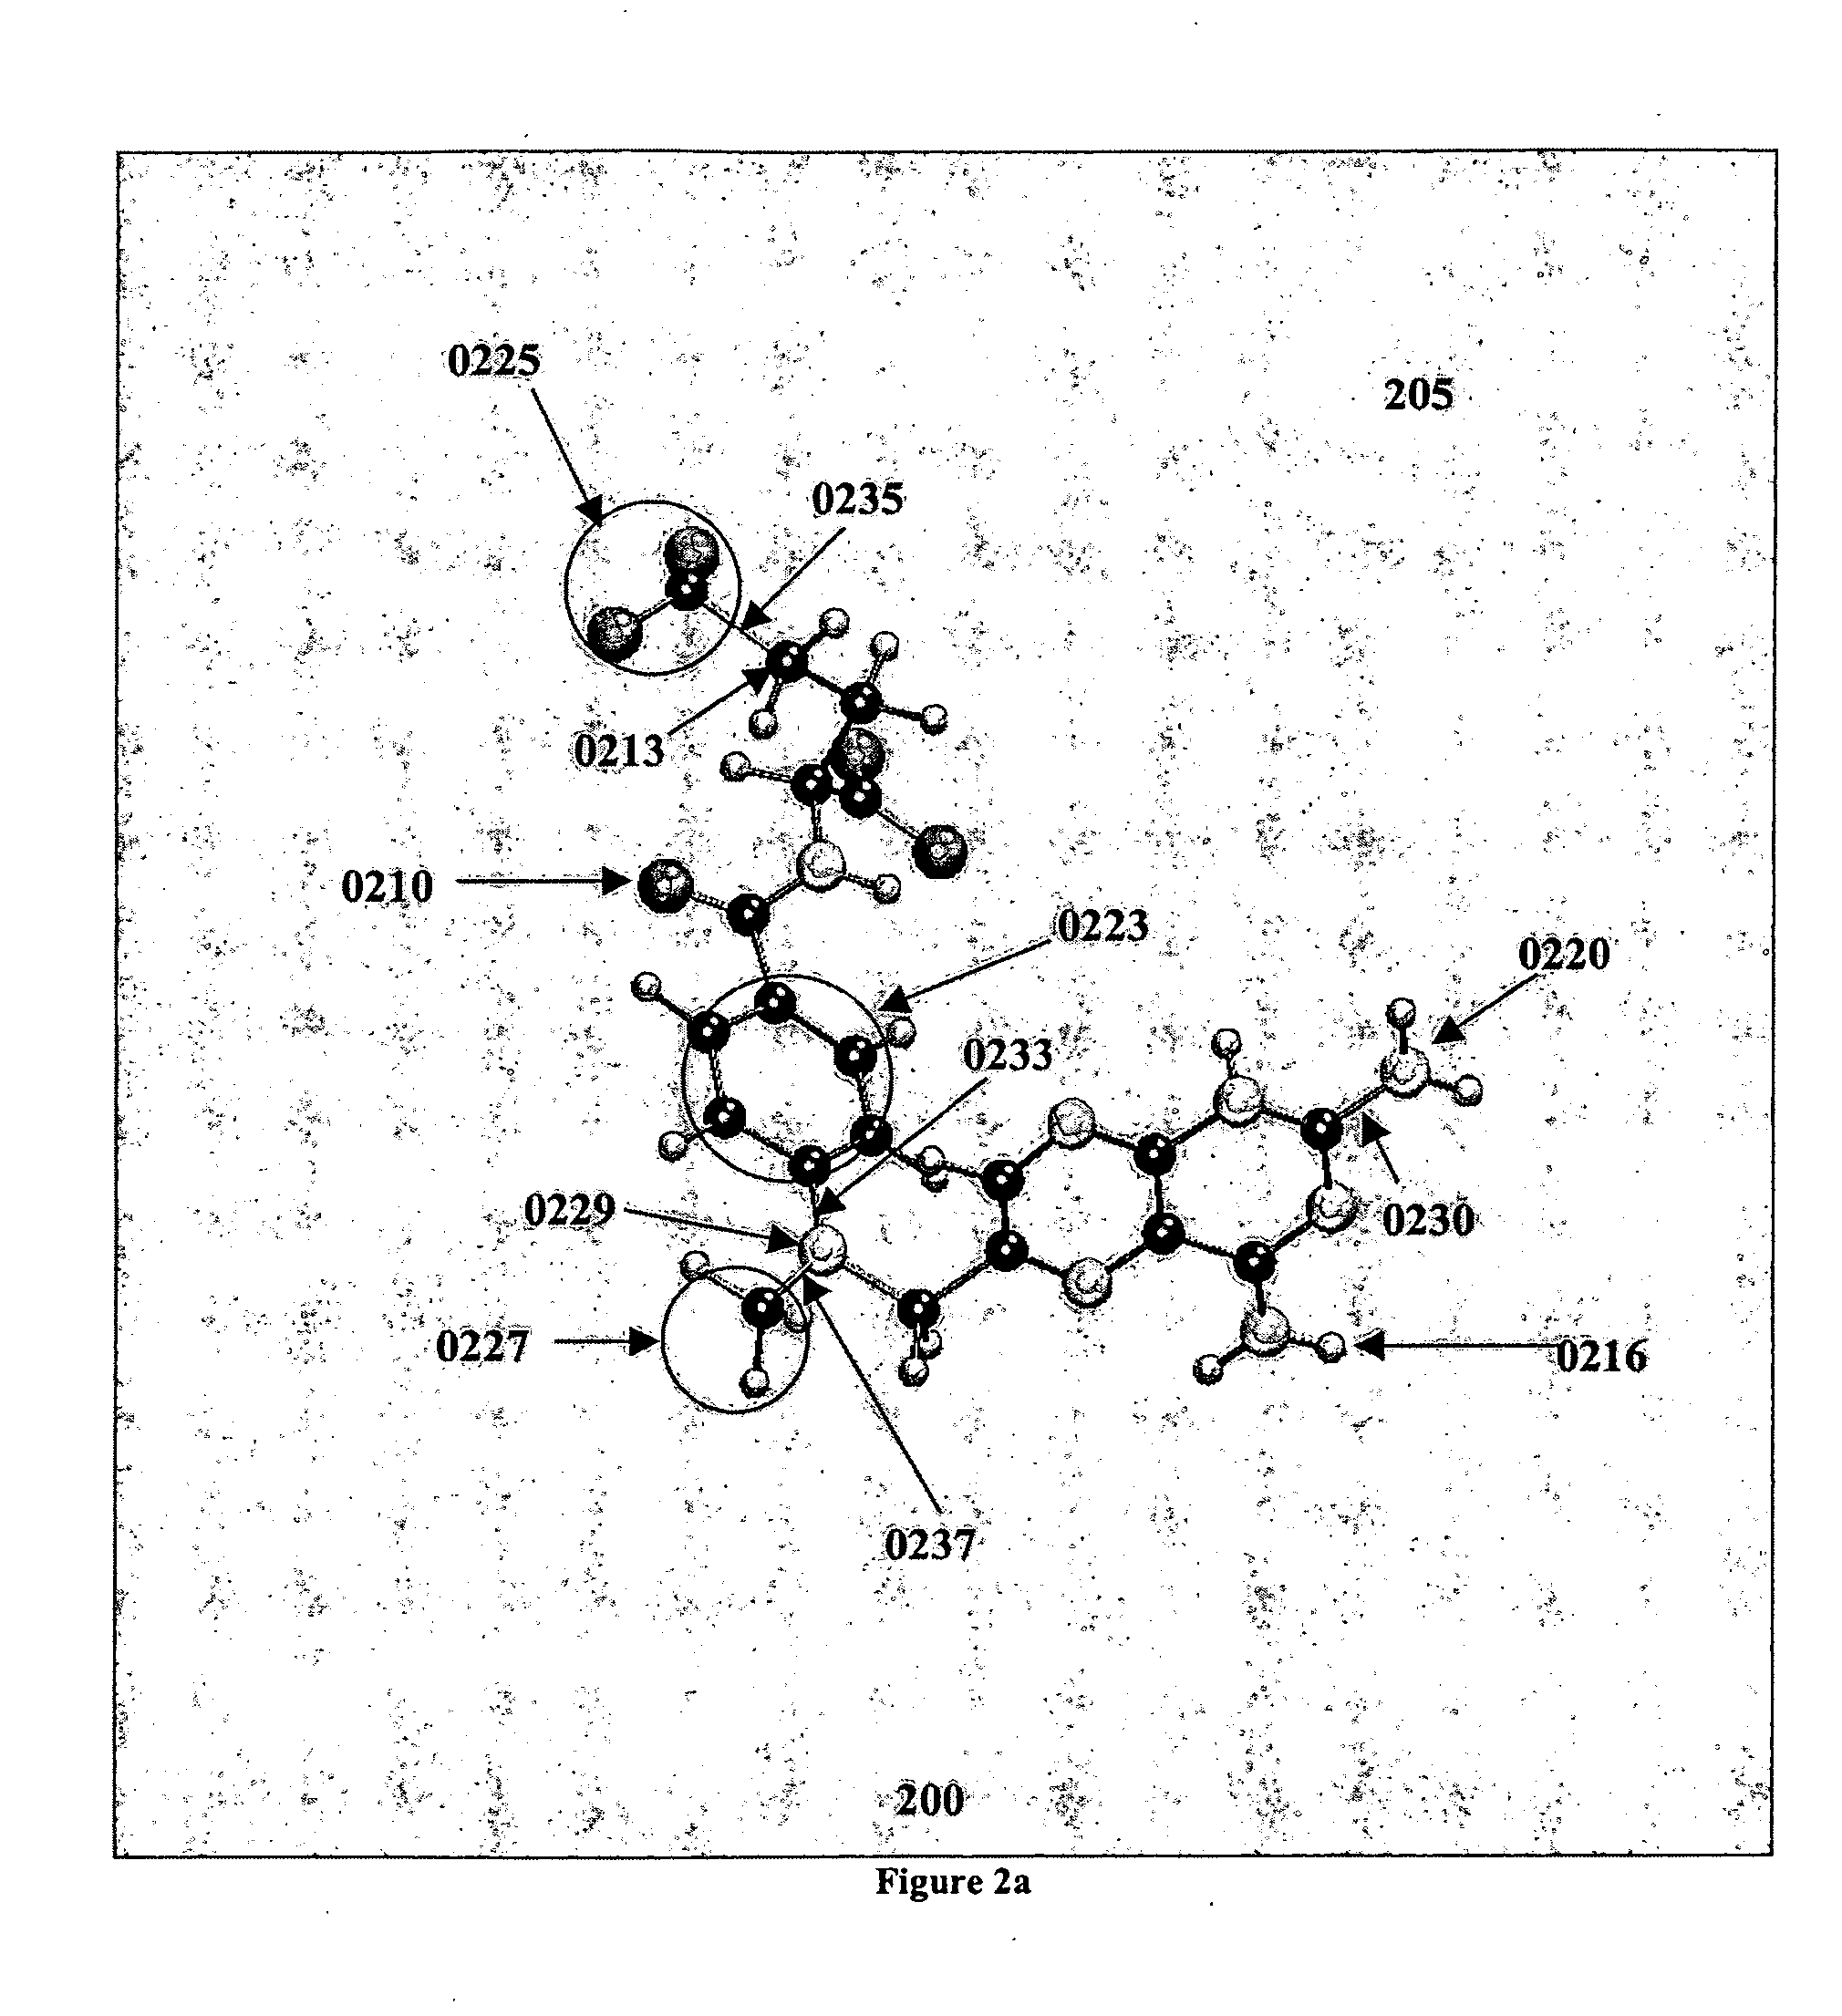 Method and apparatus for analysis of molecular combination based on computations of shape complementarity using basis expansions